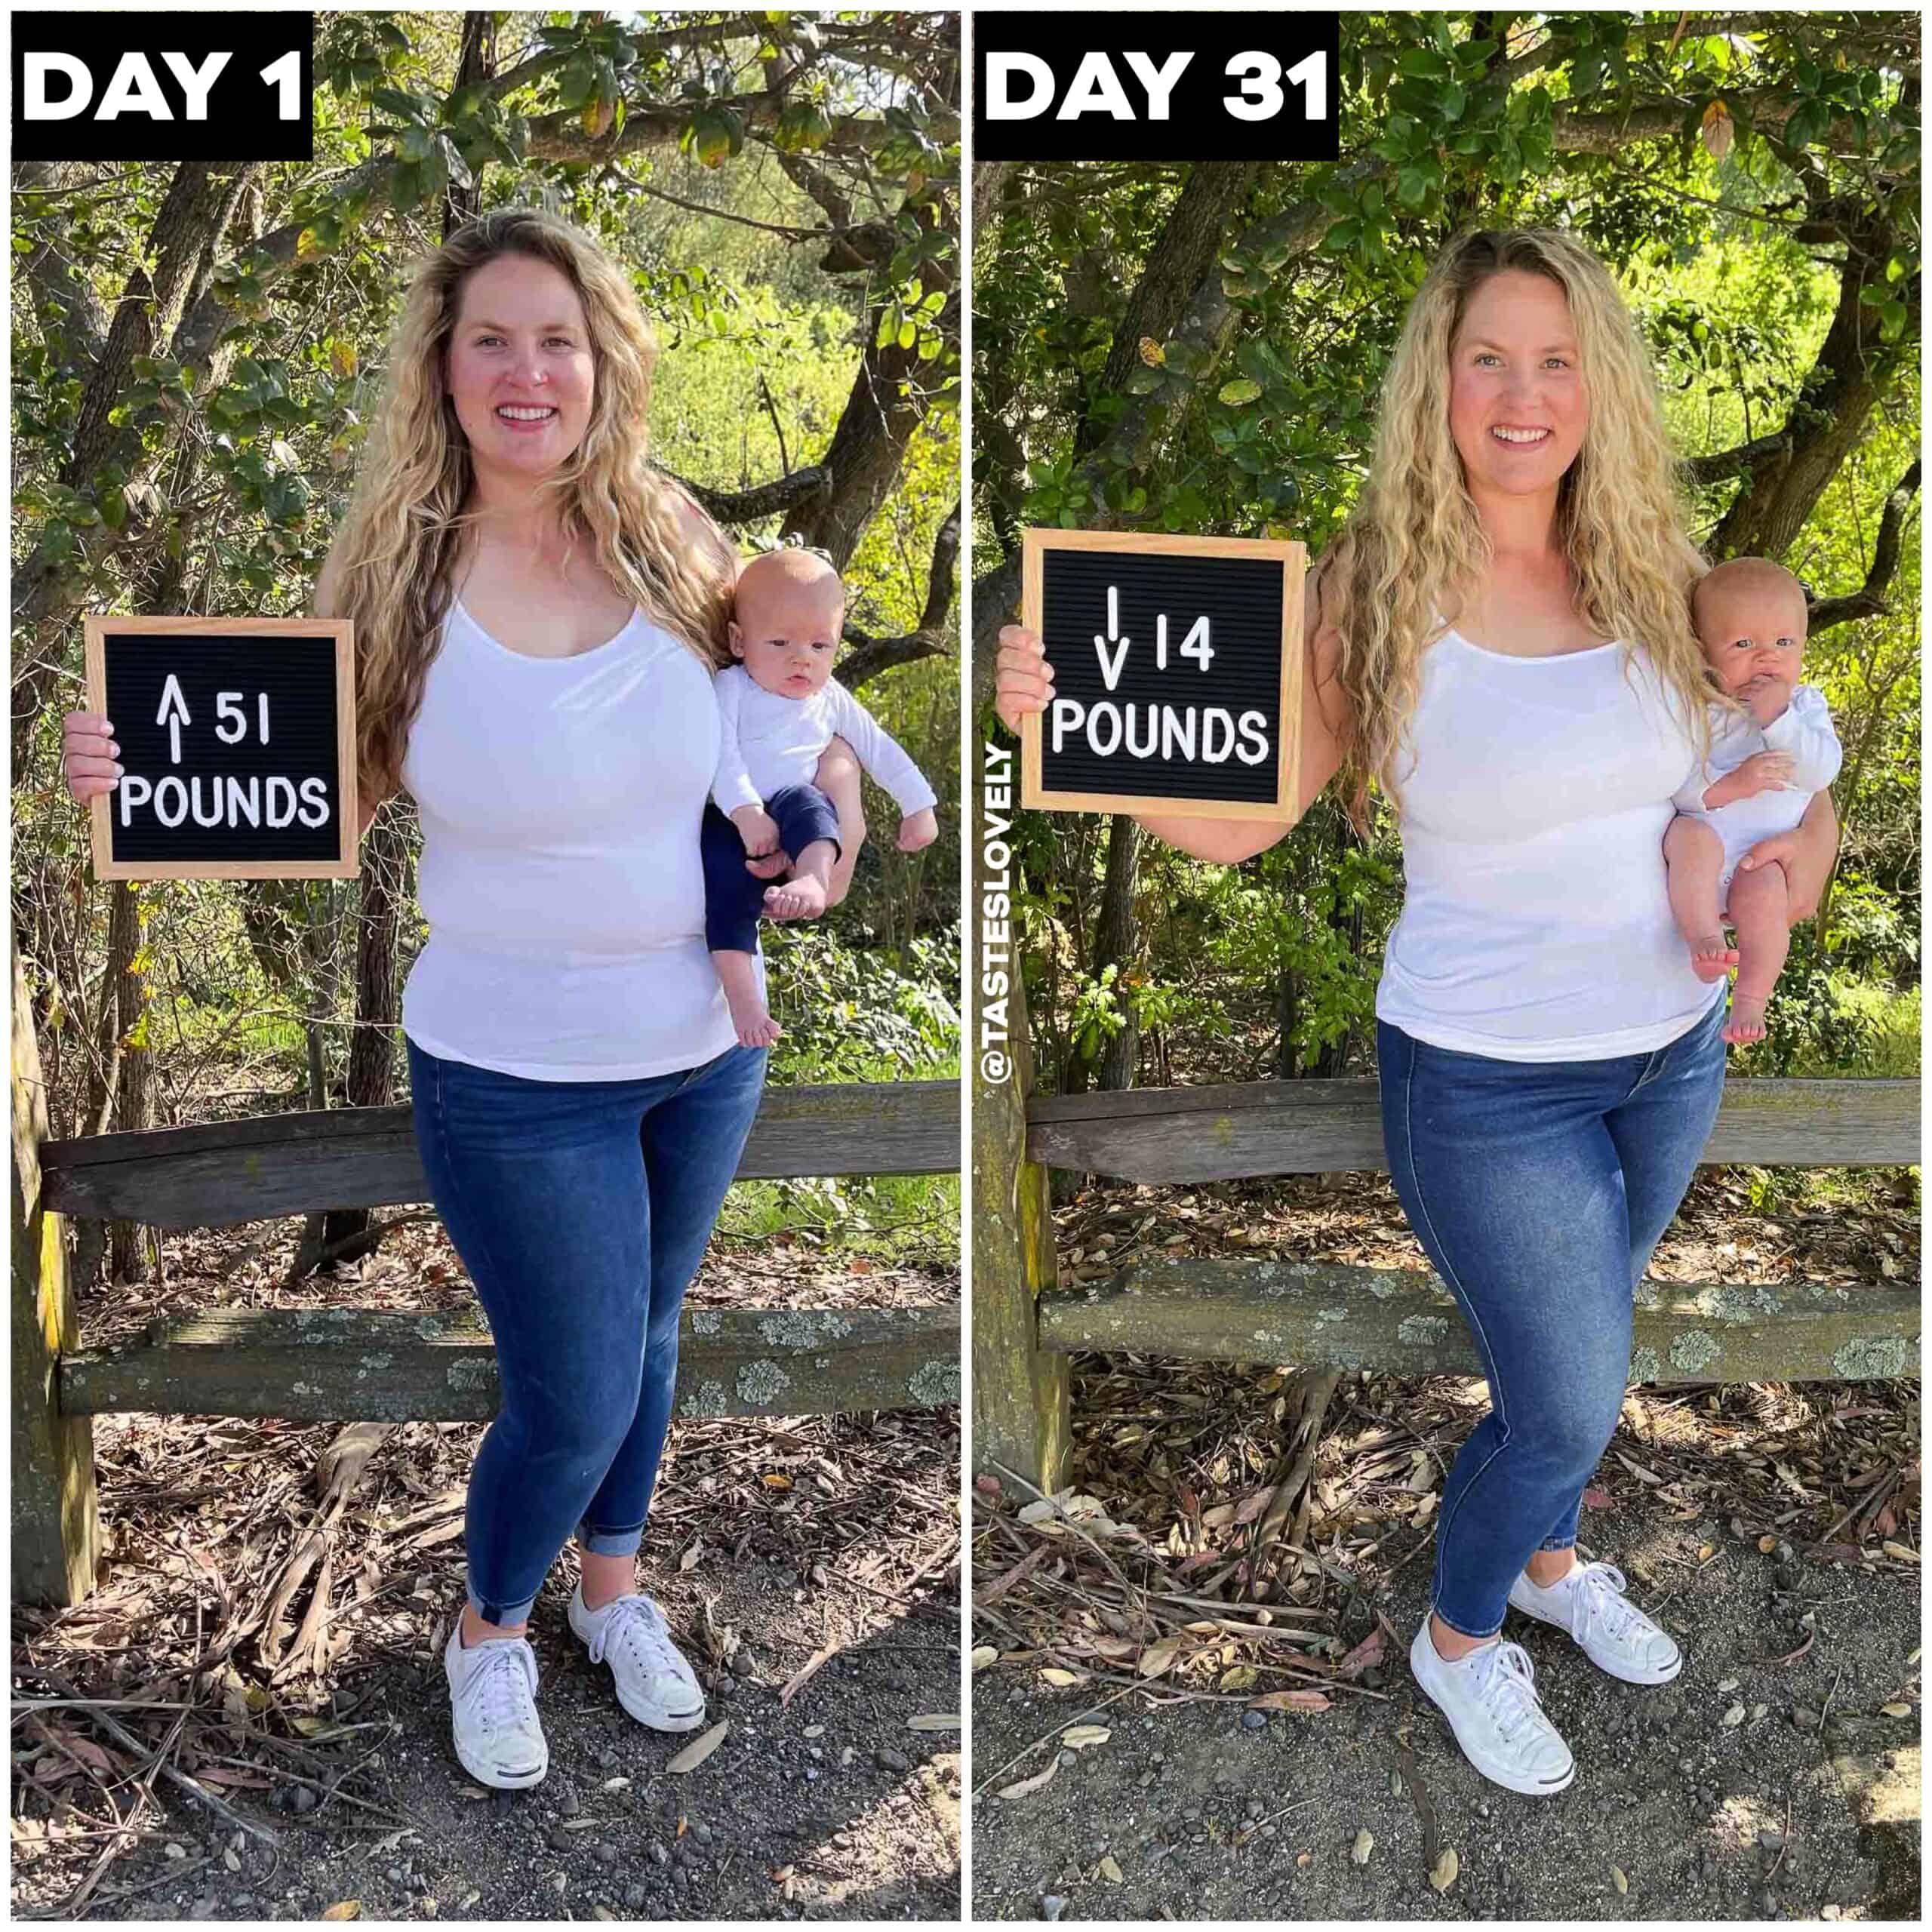 two side by side photos showing a woman who just had a baby and 31 days later after some weight loss